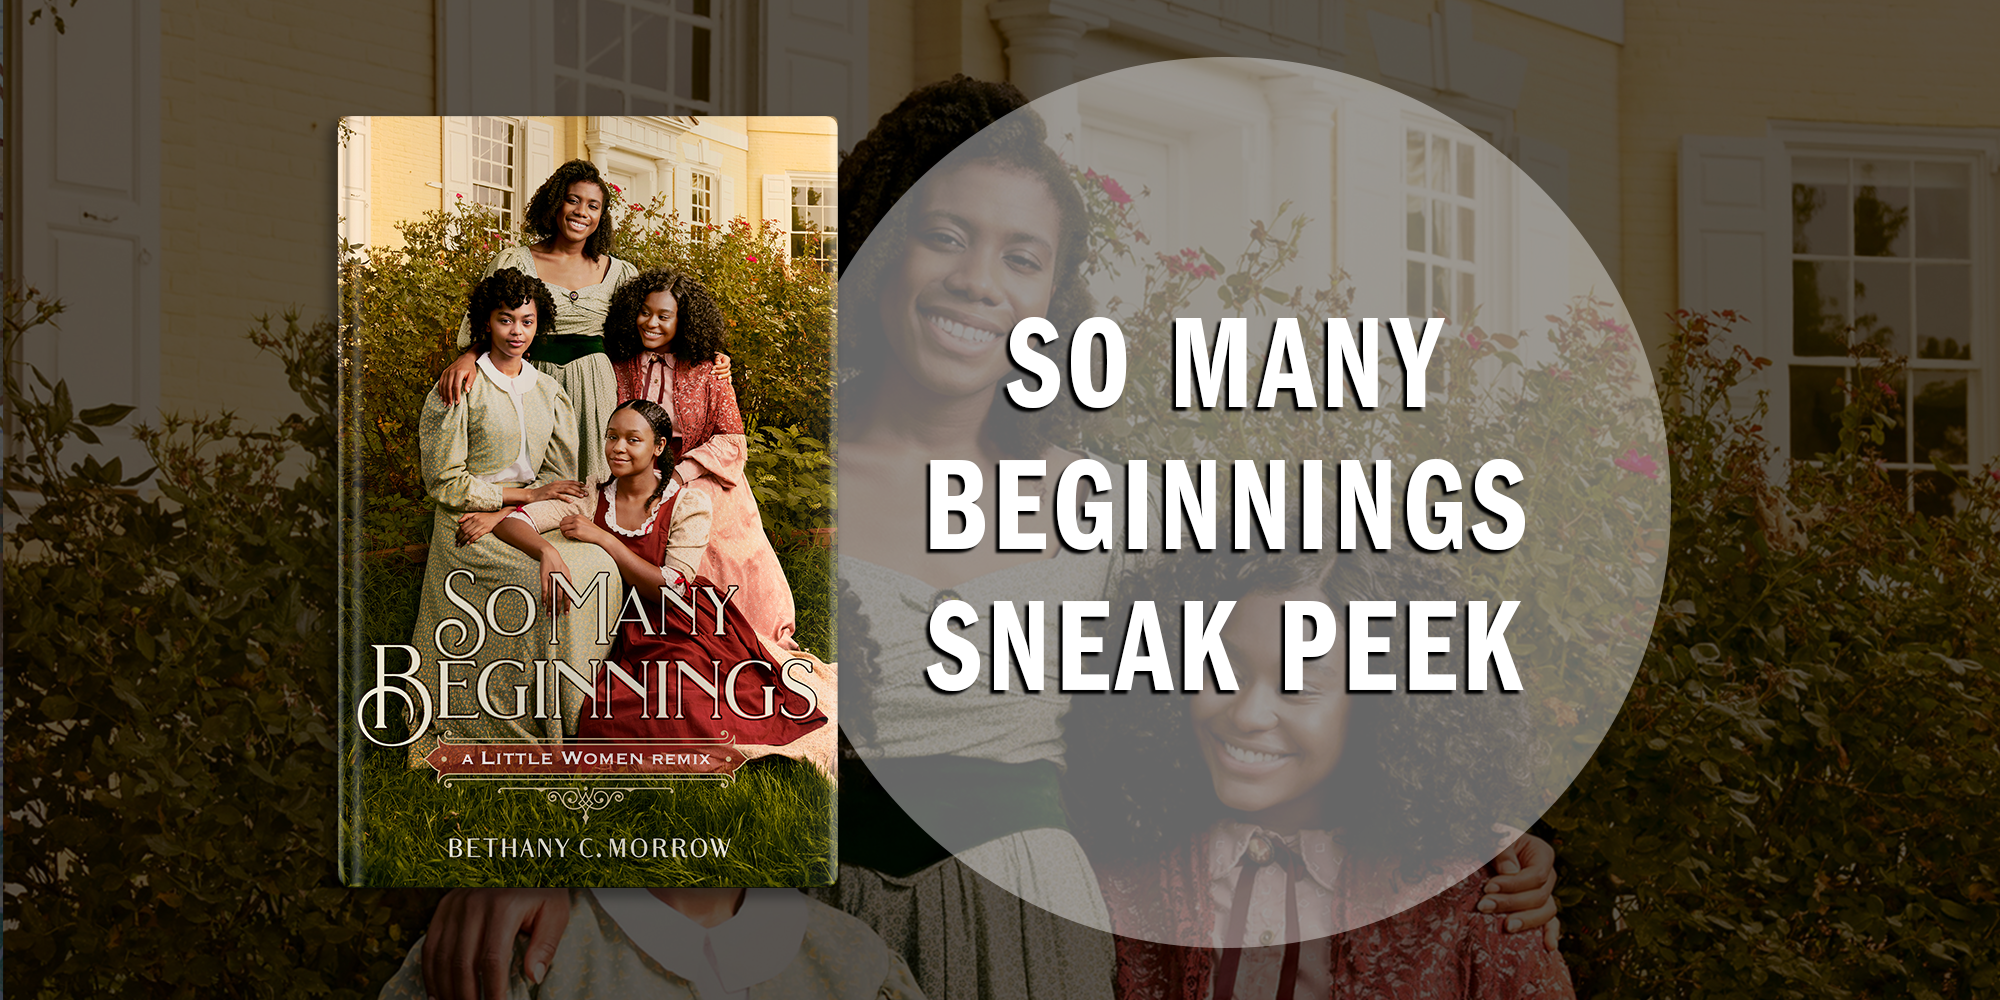 Check Out This Can’t-Miss Sneak Peek of So Many Beginnings